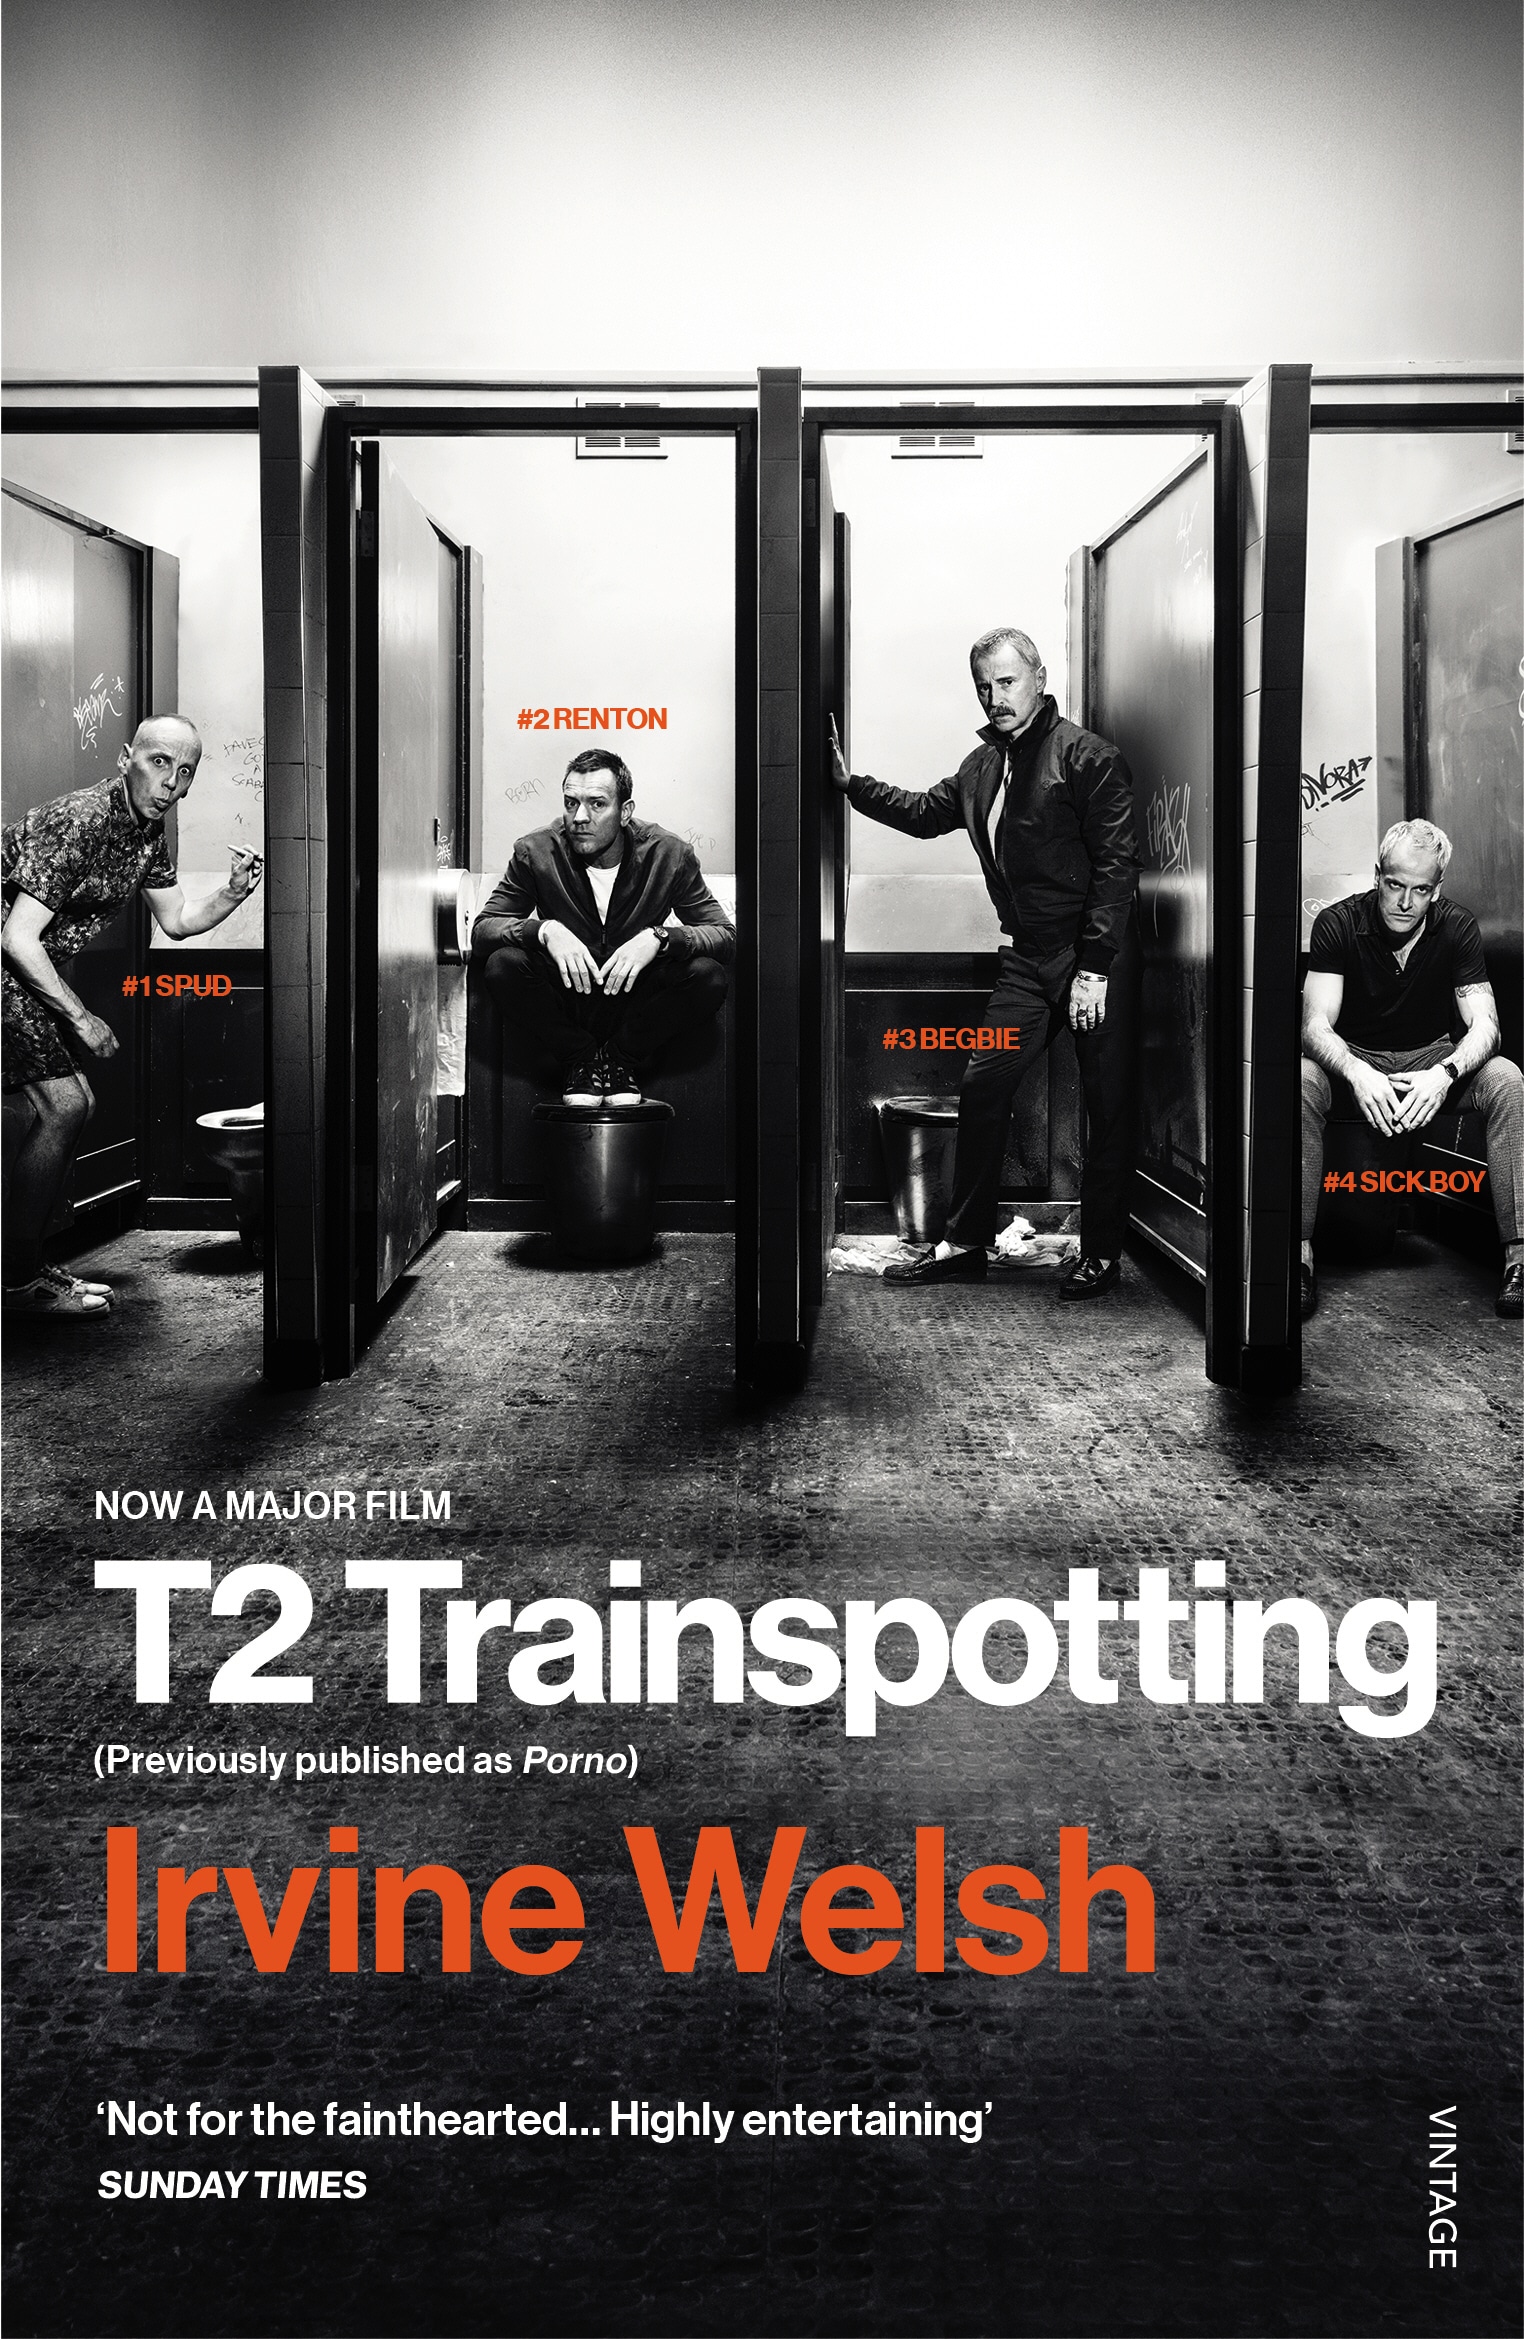 Book “T2 Trainspotting” by Irvine Welsh — January 12, 2017